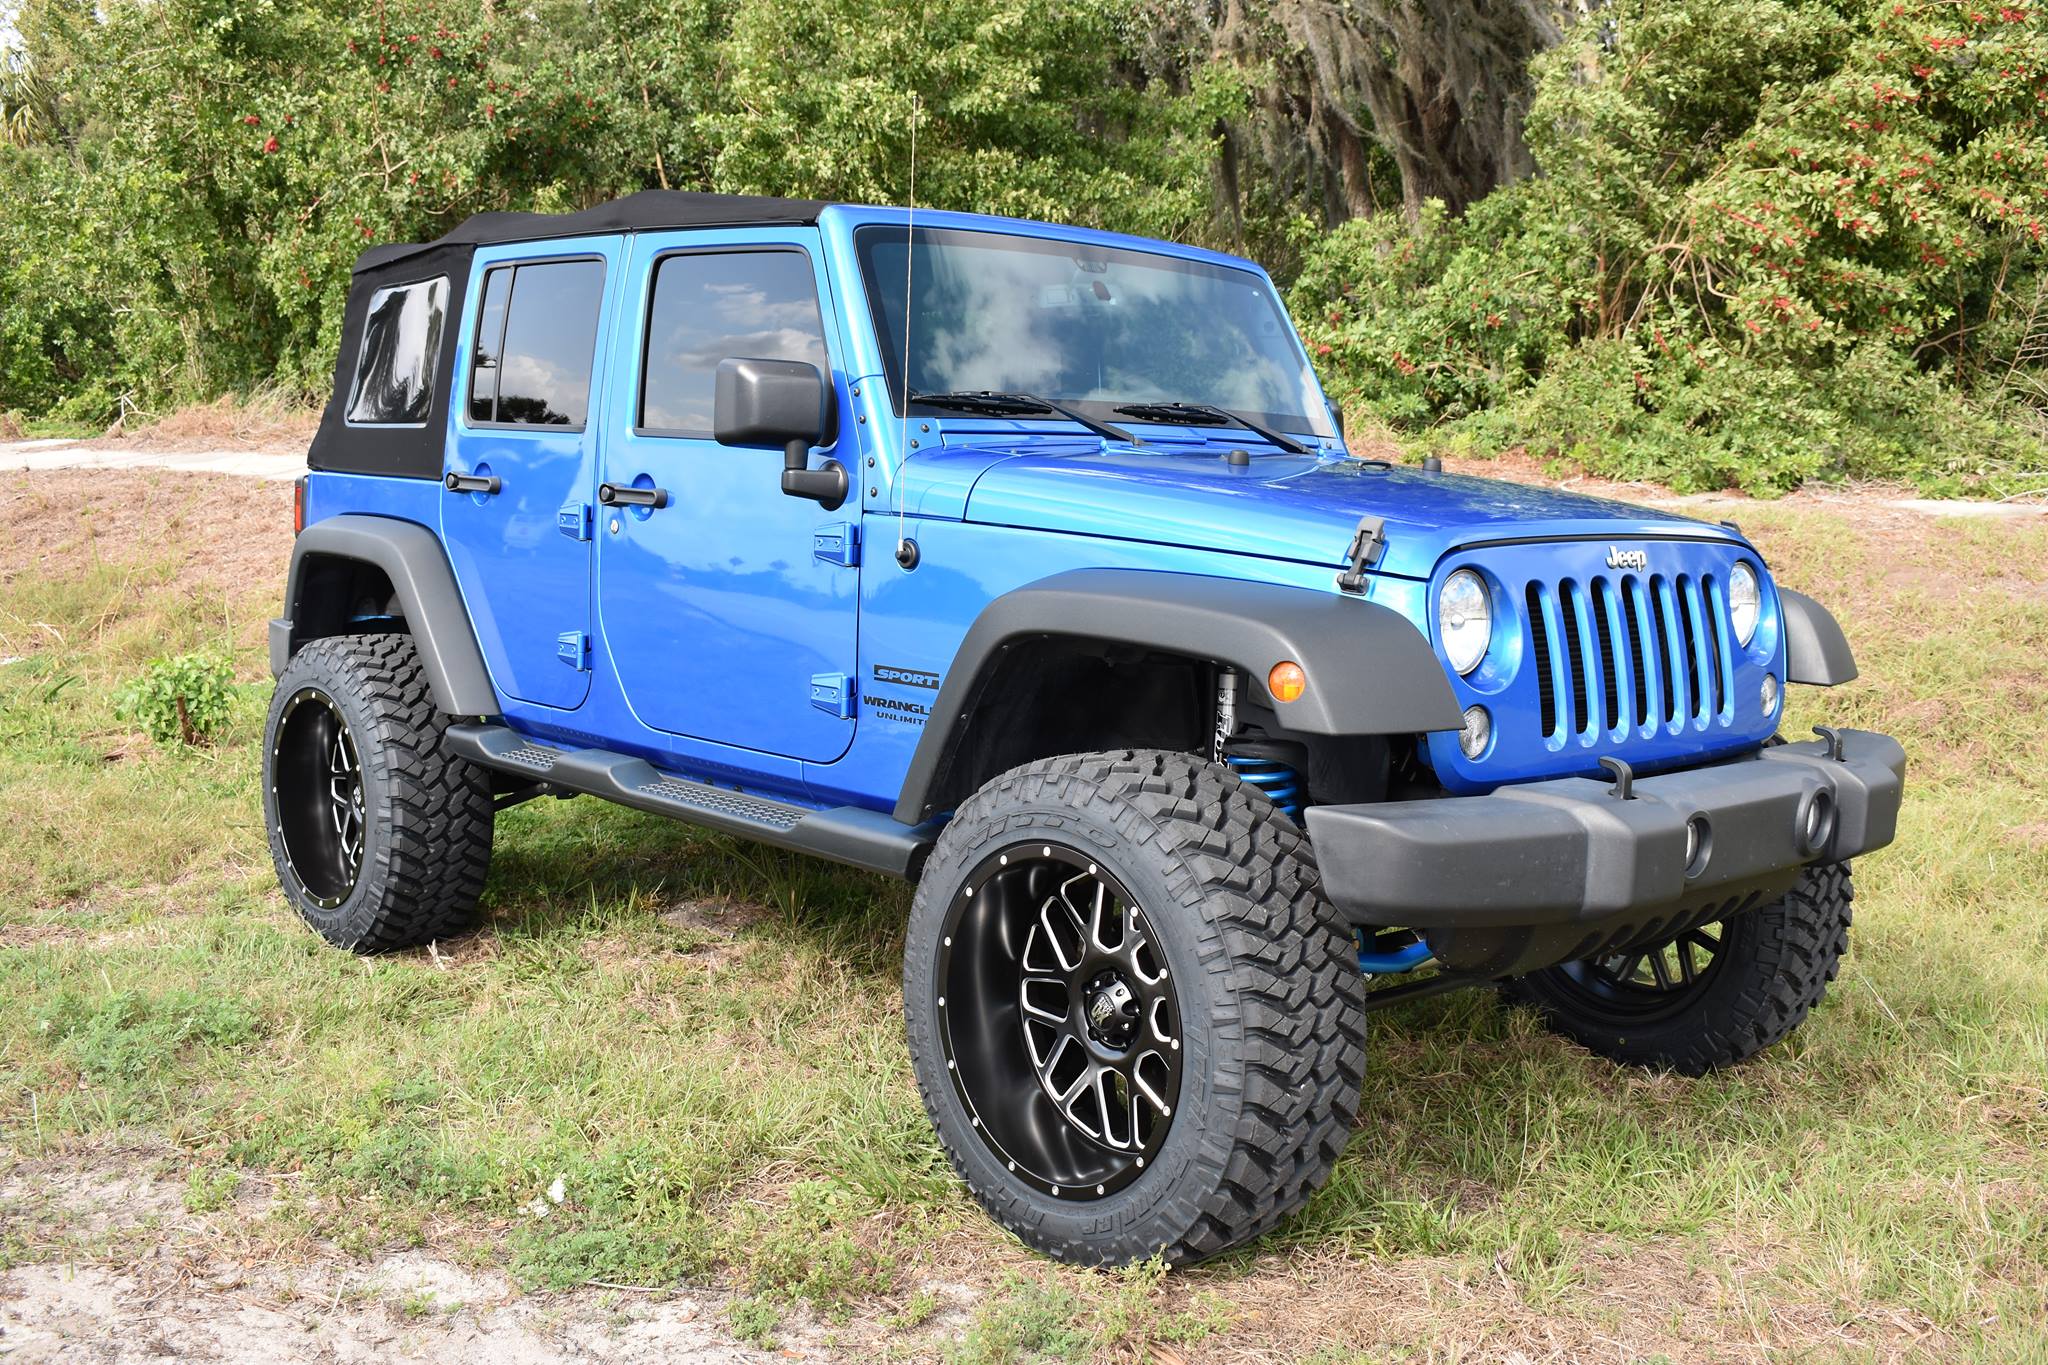 2015 Jeep Wrangler with 3.5" Rubicon lift kit, Fox shocks, Fox steering stabilizer, Fuel Grenade wheels, and 35" Nitto tires